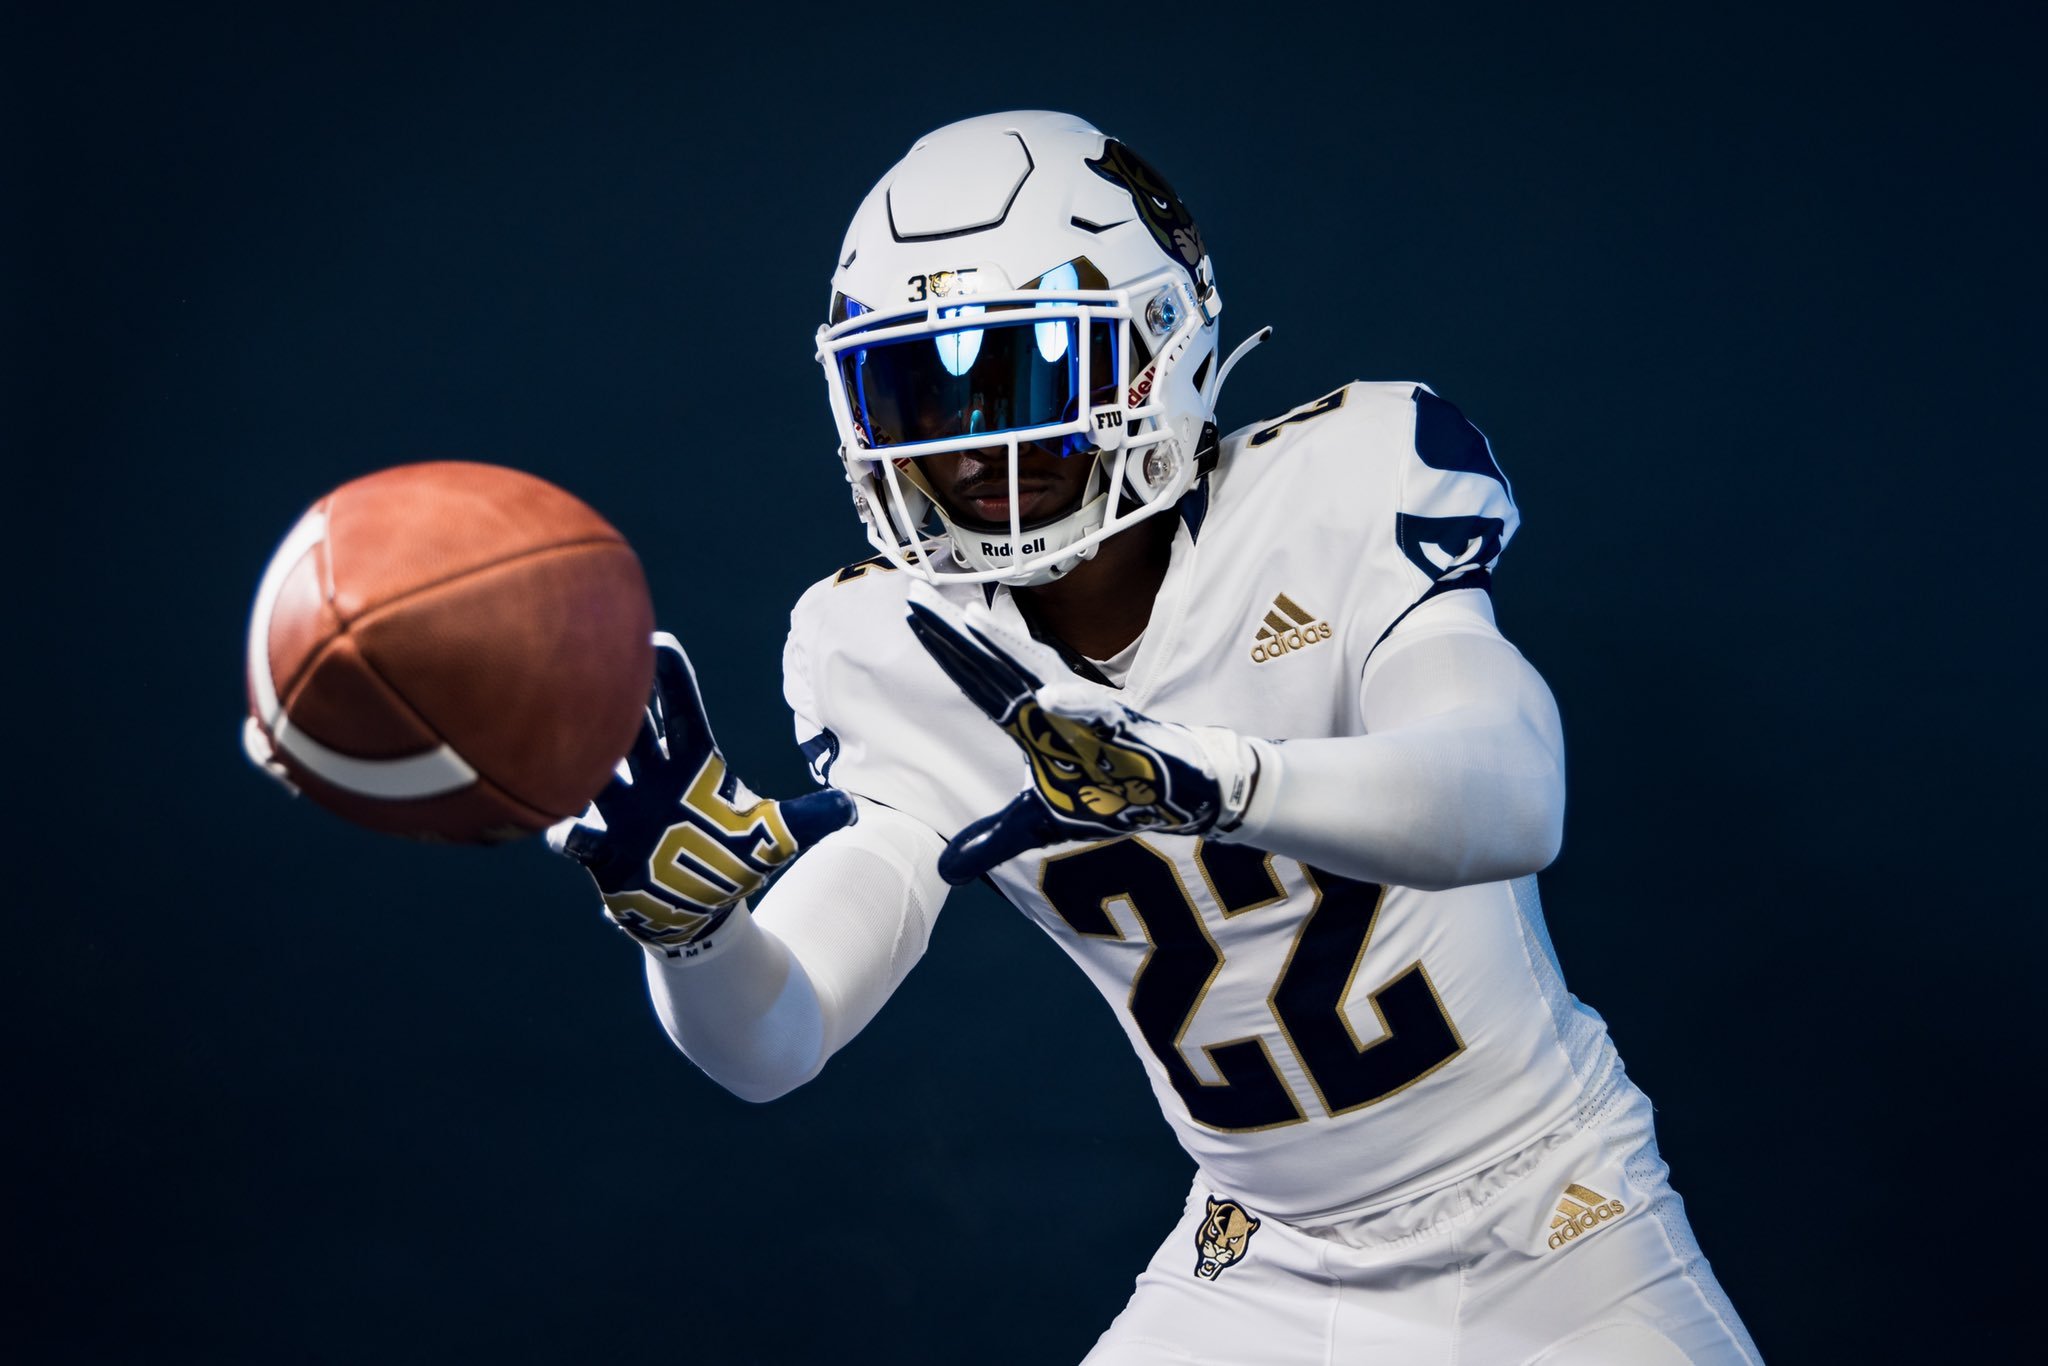 FIU football unveils 'incredible' special edition 'Miami Vice' inspired  jerseys paying homage to their hometown